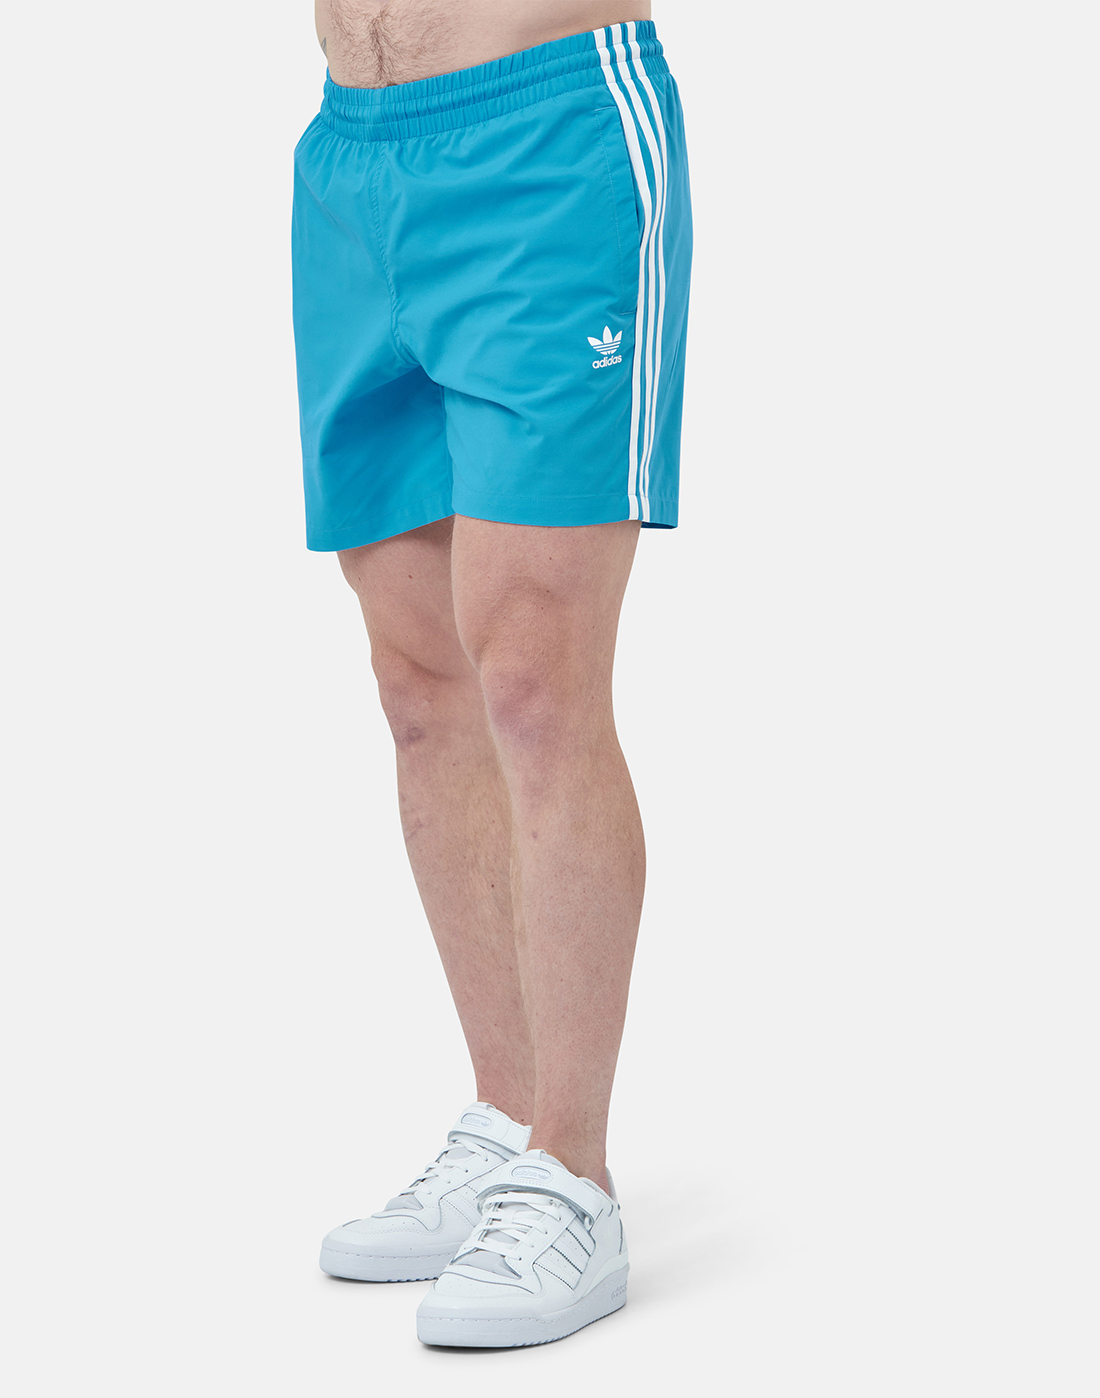 Originals Mens Trace Shorts - Blue | Life Style Sports IE